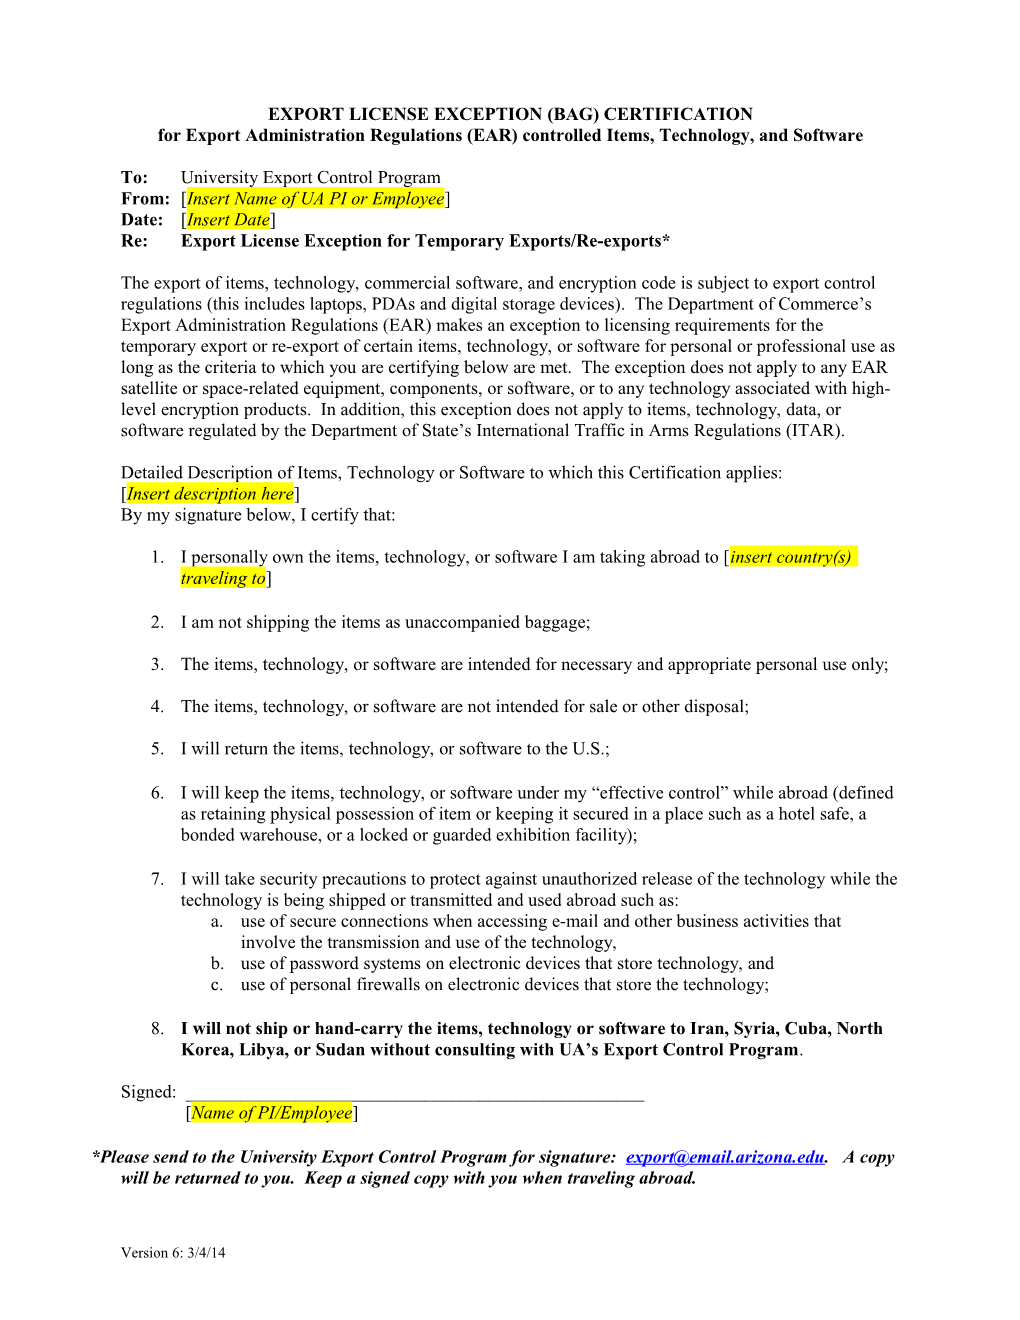 Export License Exception (Tmp) Certification s1